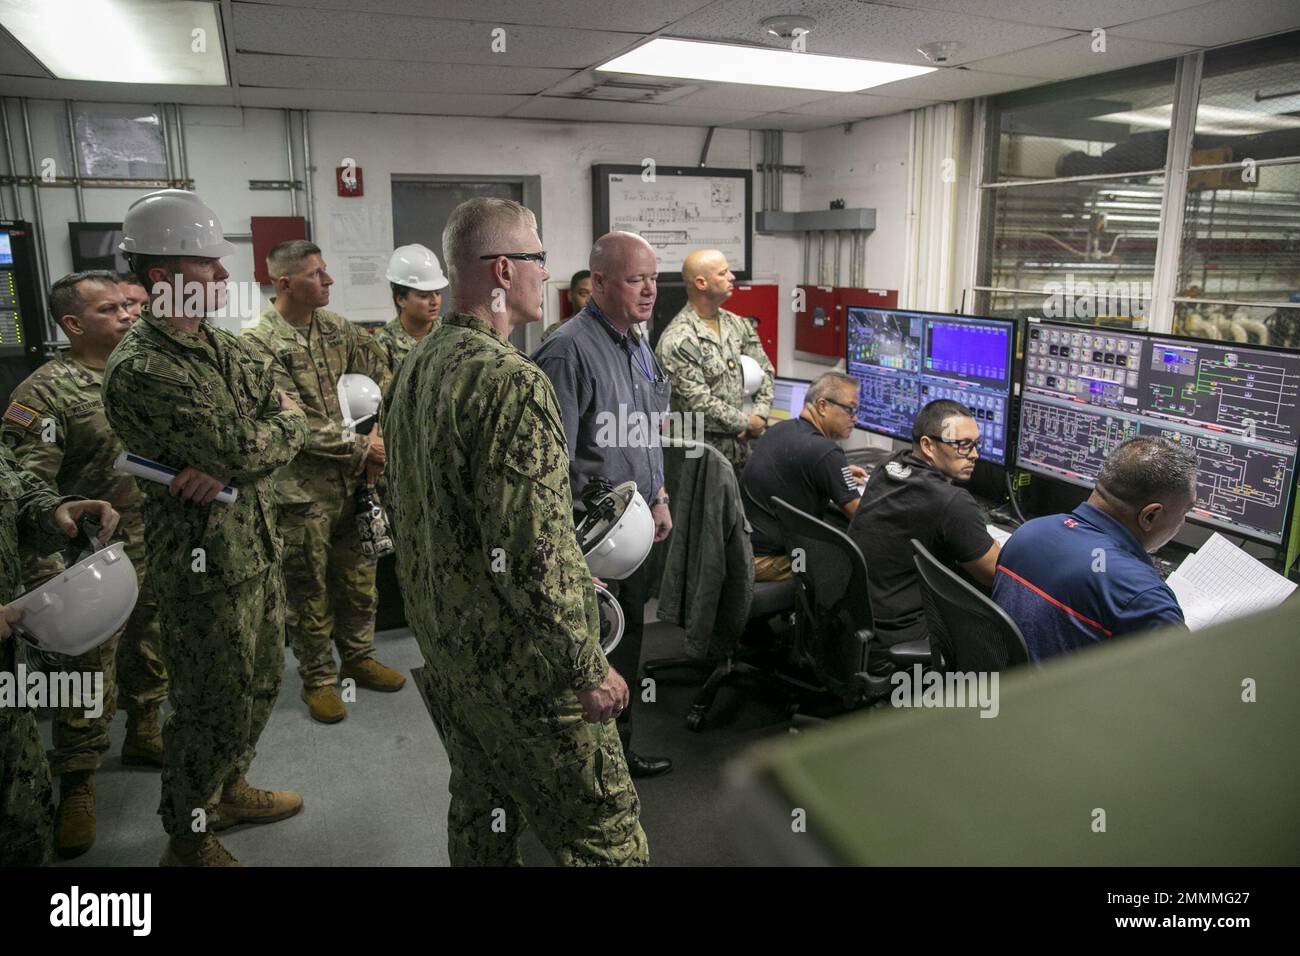 U.S. Navy Rear Adm. John Wade, the commander of Joint Task Force-Red Hill (JTF-RH), tours the Red Hill Bulk Fuel Storage Facility (RHBFSF) control room in Halawa, Hawaii, Sept. 20, 2022. Joint Task Force-Red Hill ensures the safe and expeditious defueling of the Red Hill Bulk Fuel Storage Facility through coordination with State and Federal stakeholders in order to set conditions for closure while continuing to rebuild trust with the State of Hawaii and the local community of Oahu. Stock Photo